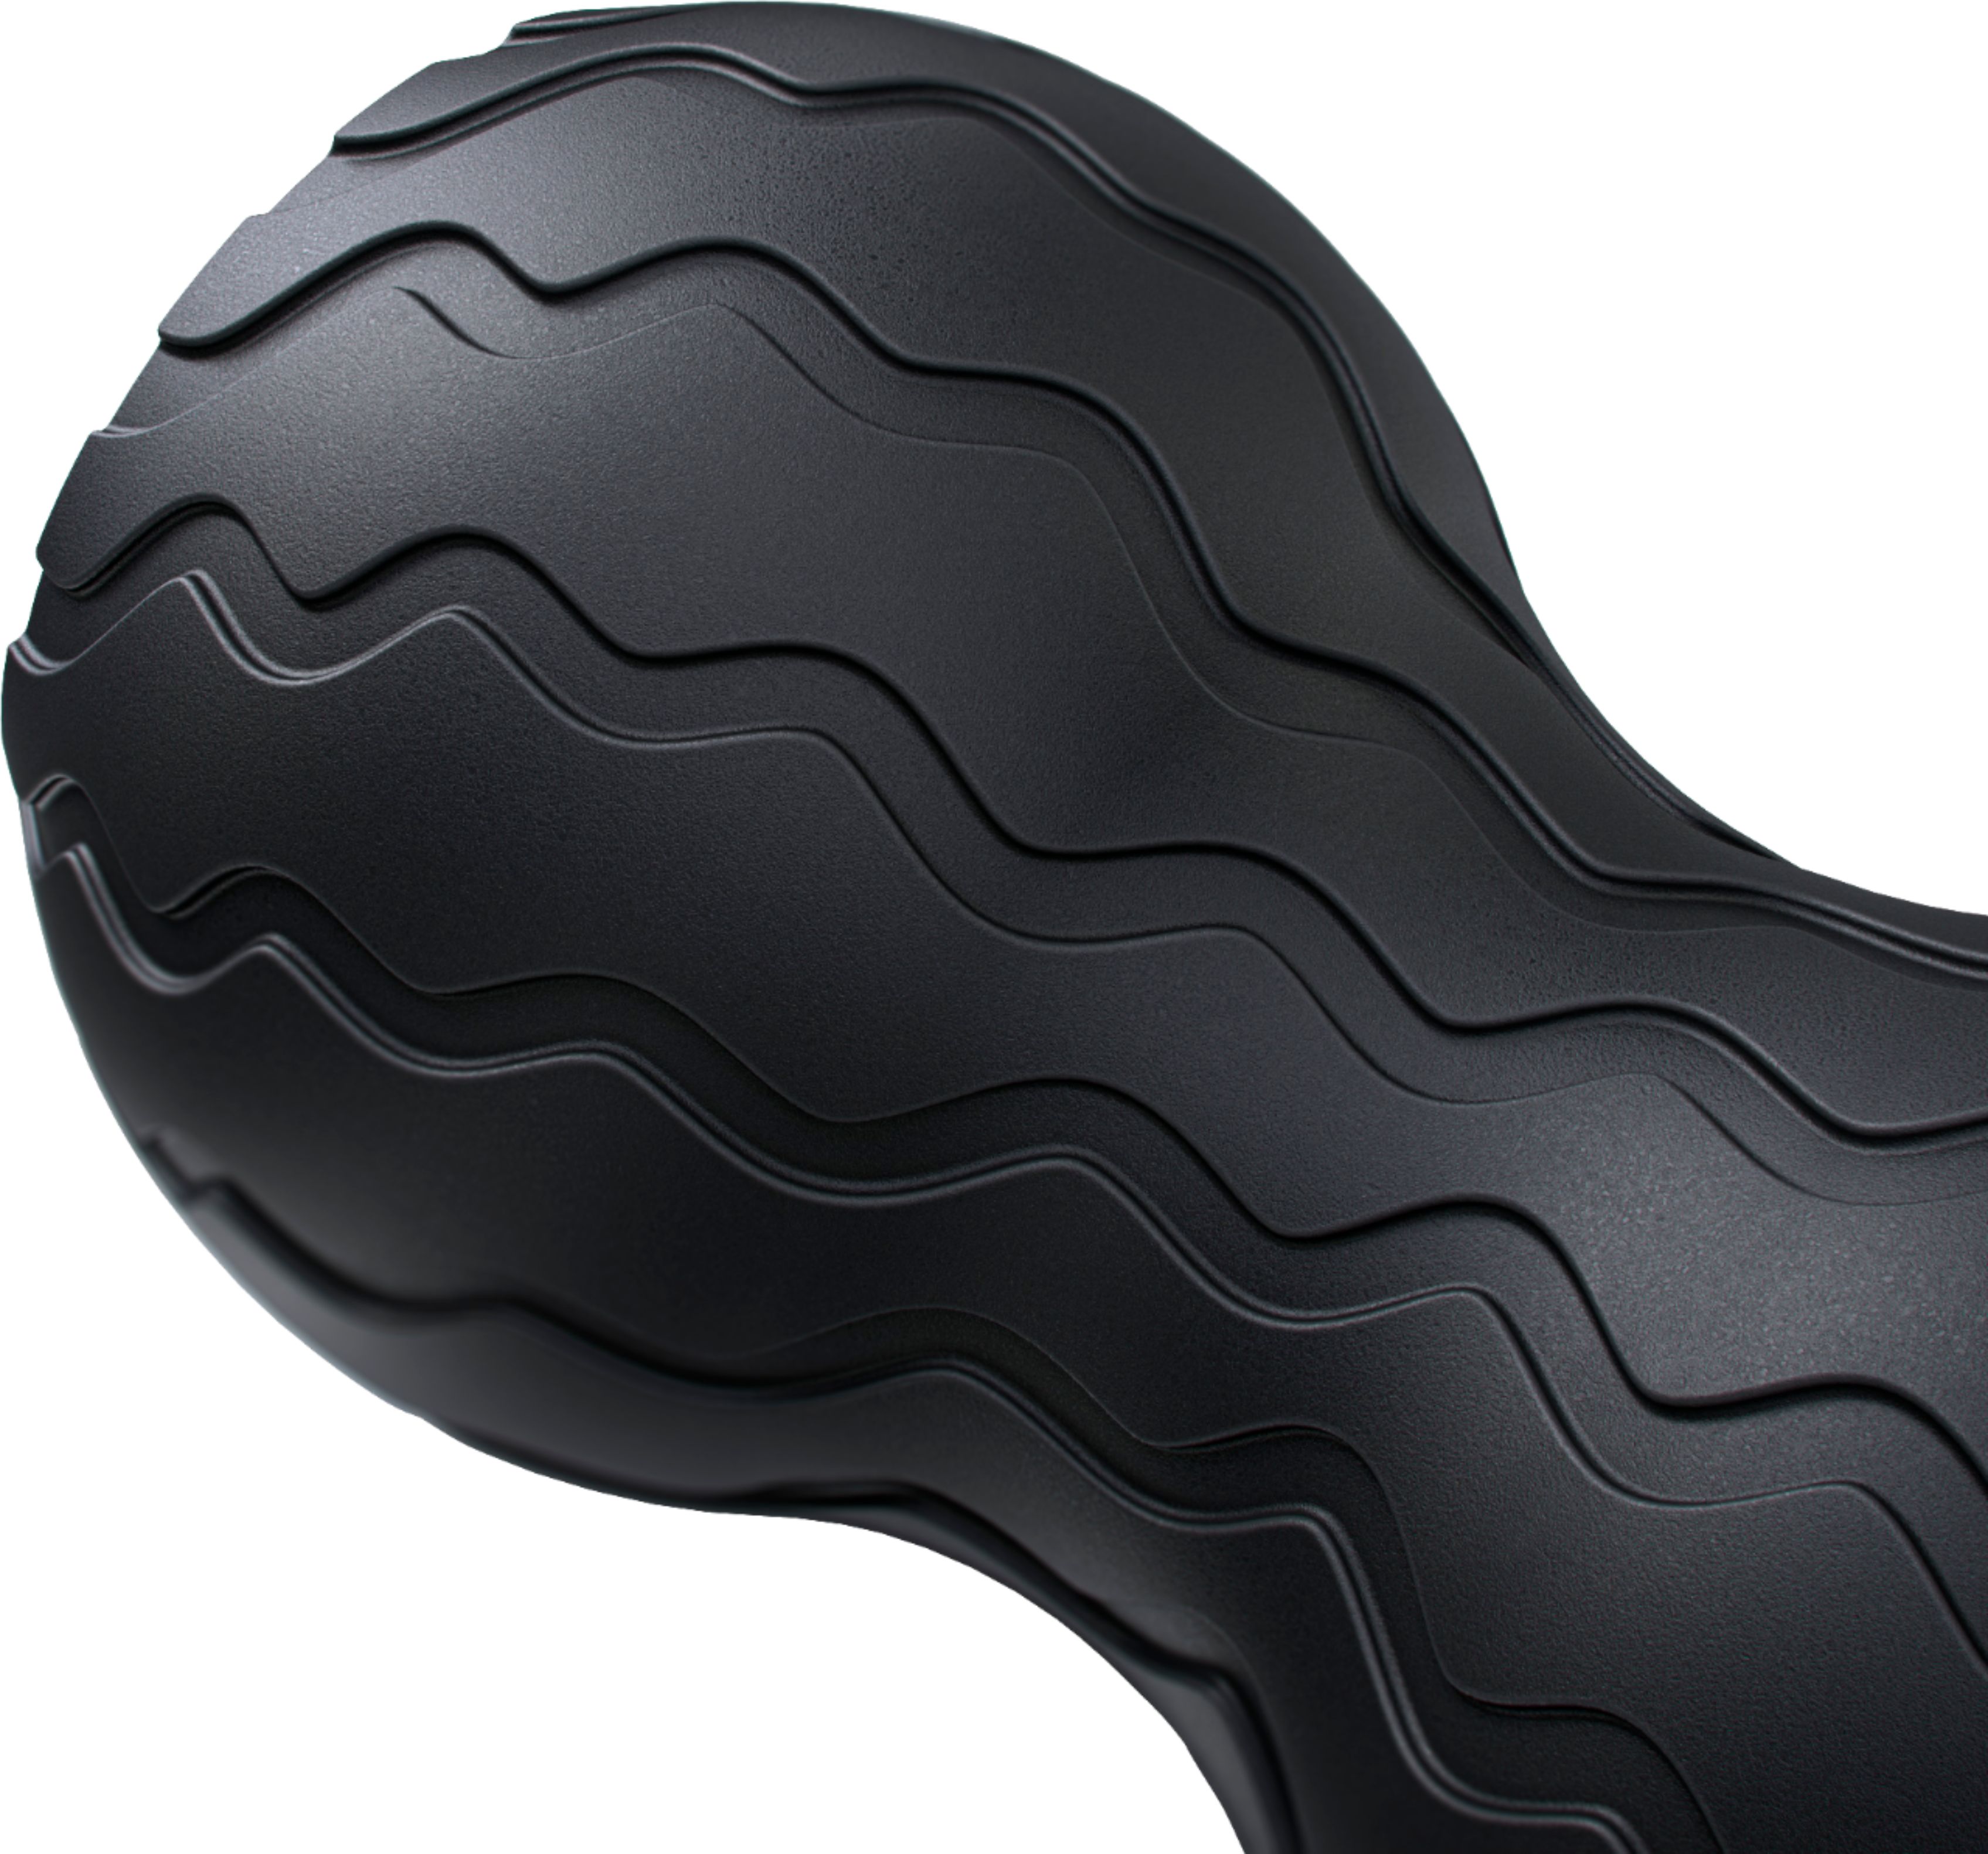 Left View: Therabody - Wave Duo Vibrating Massage Device - Black